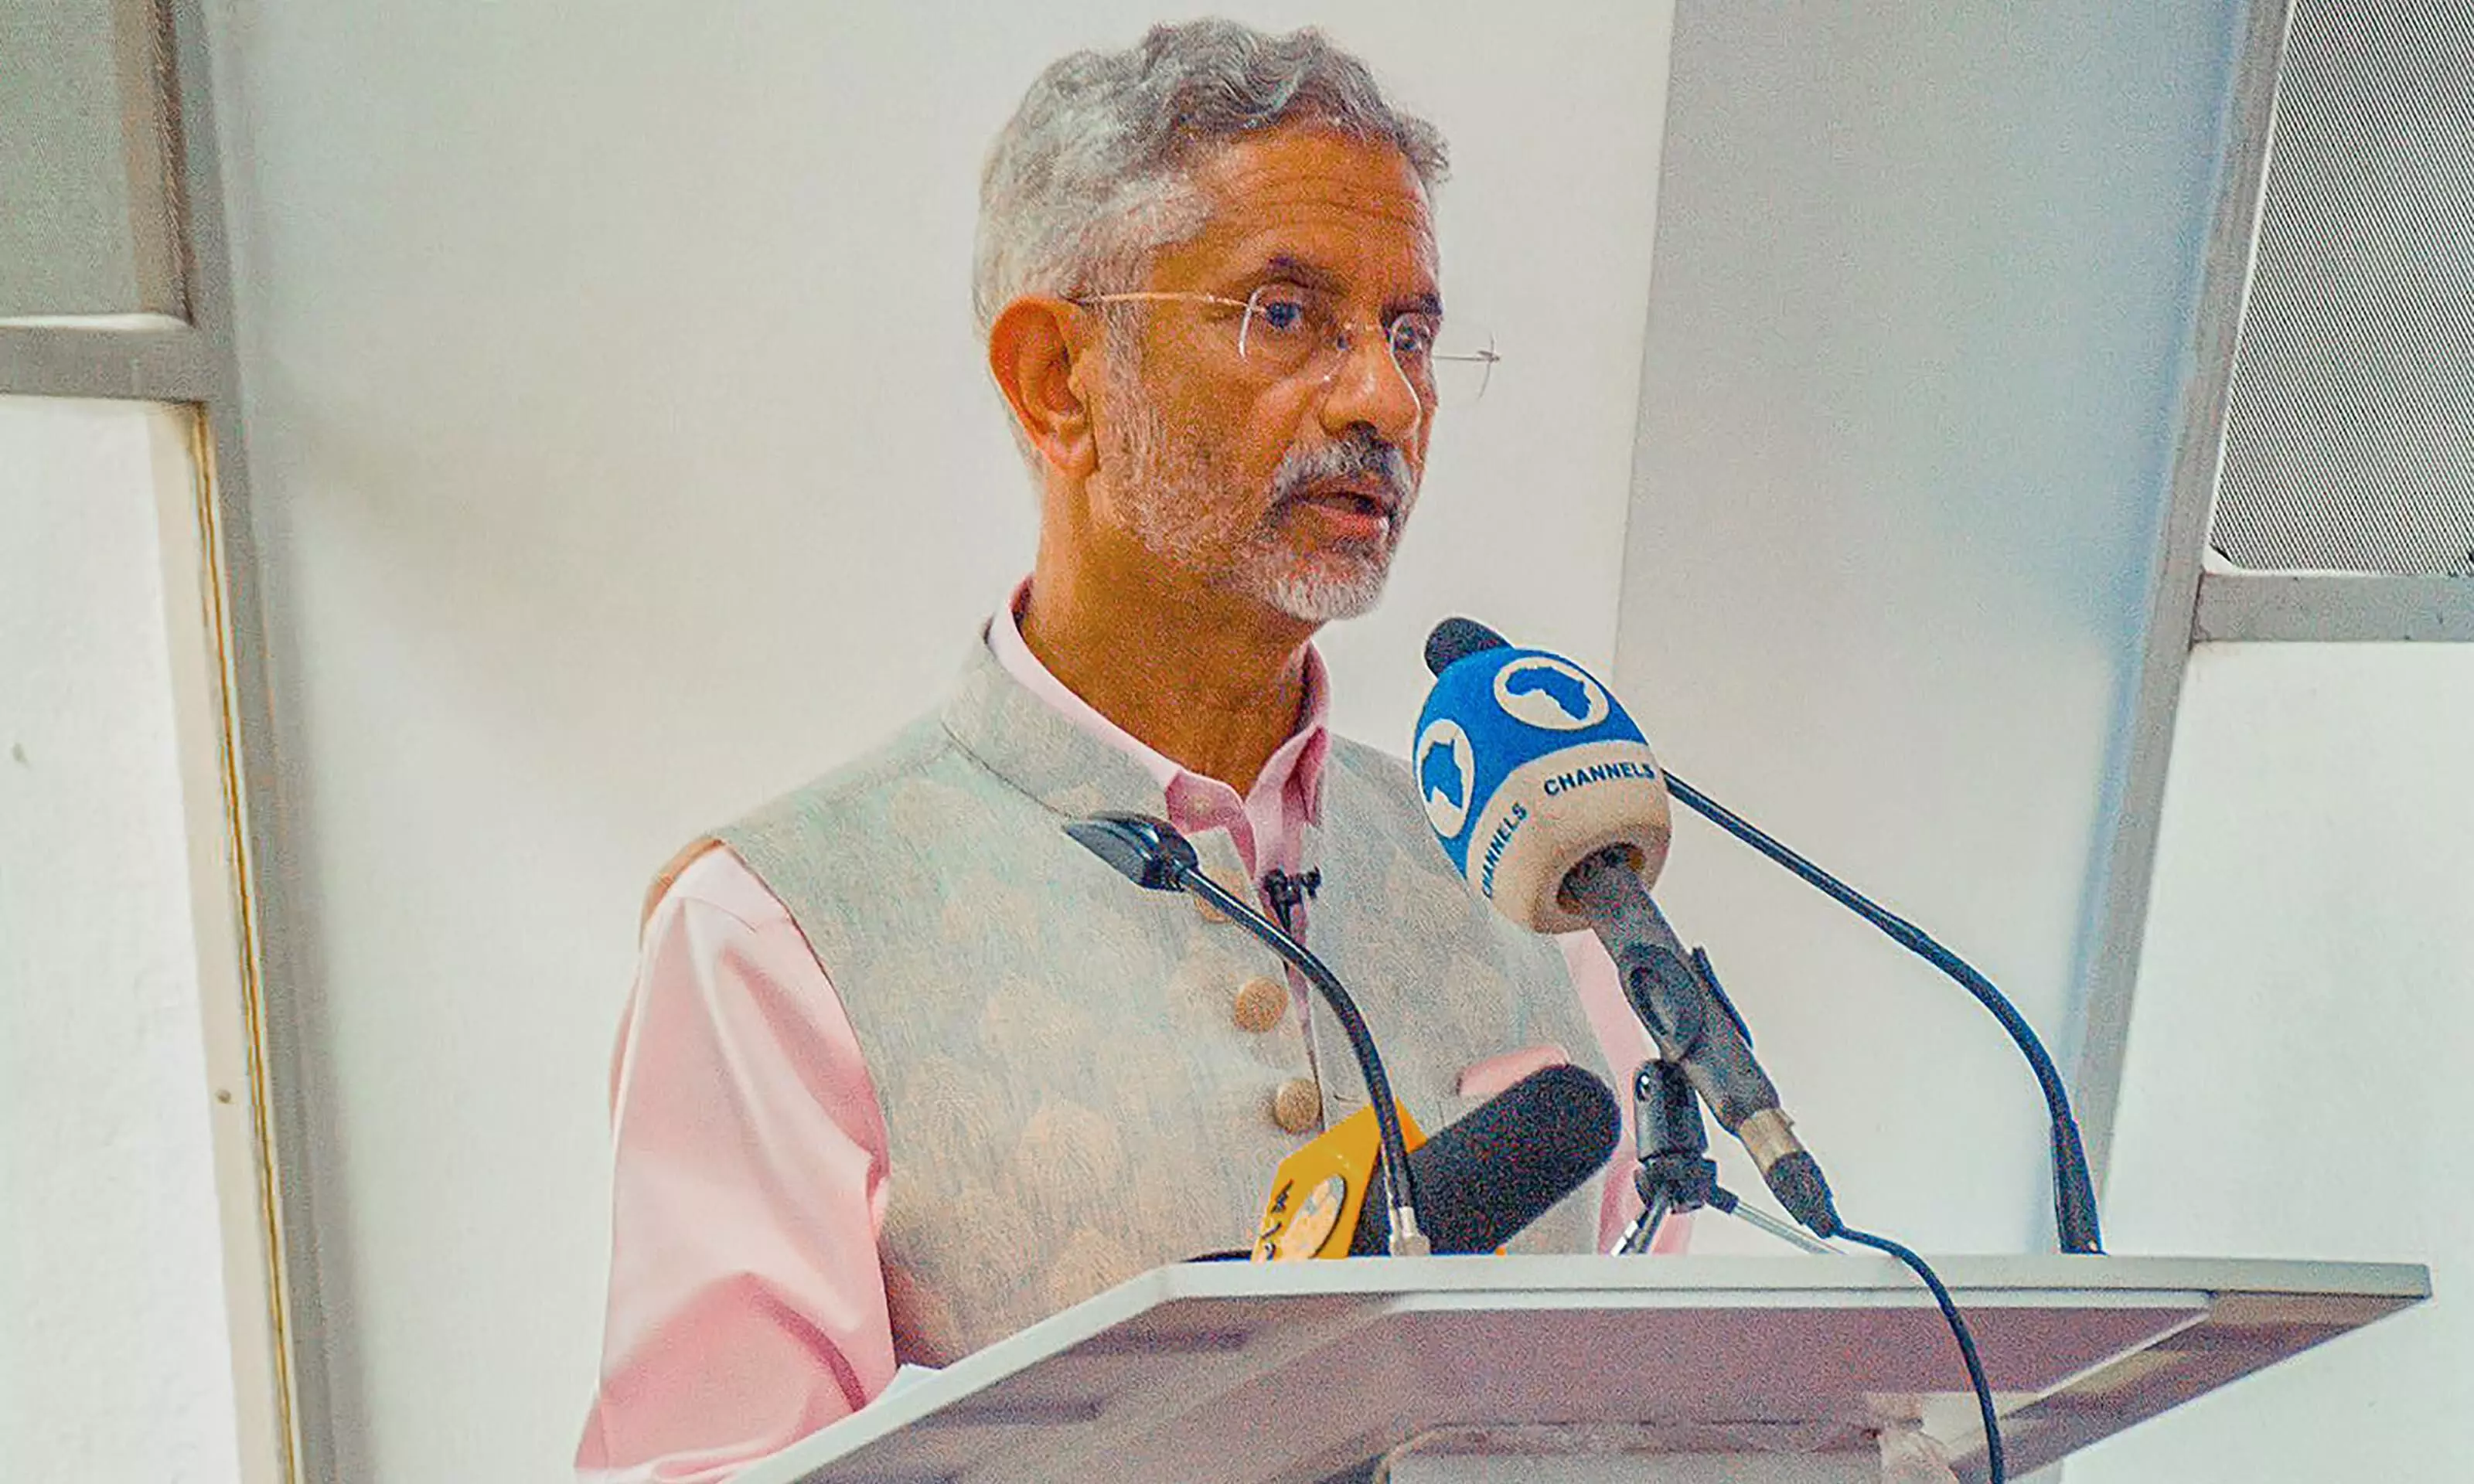 Global South is about a mindset, a solidarity and a self-reliance, says Jaishankar